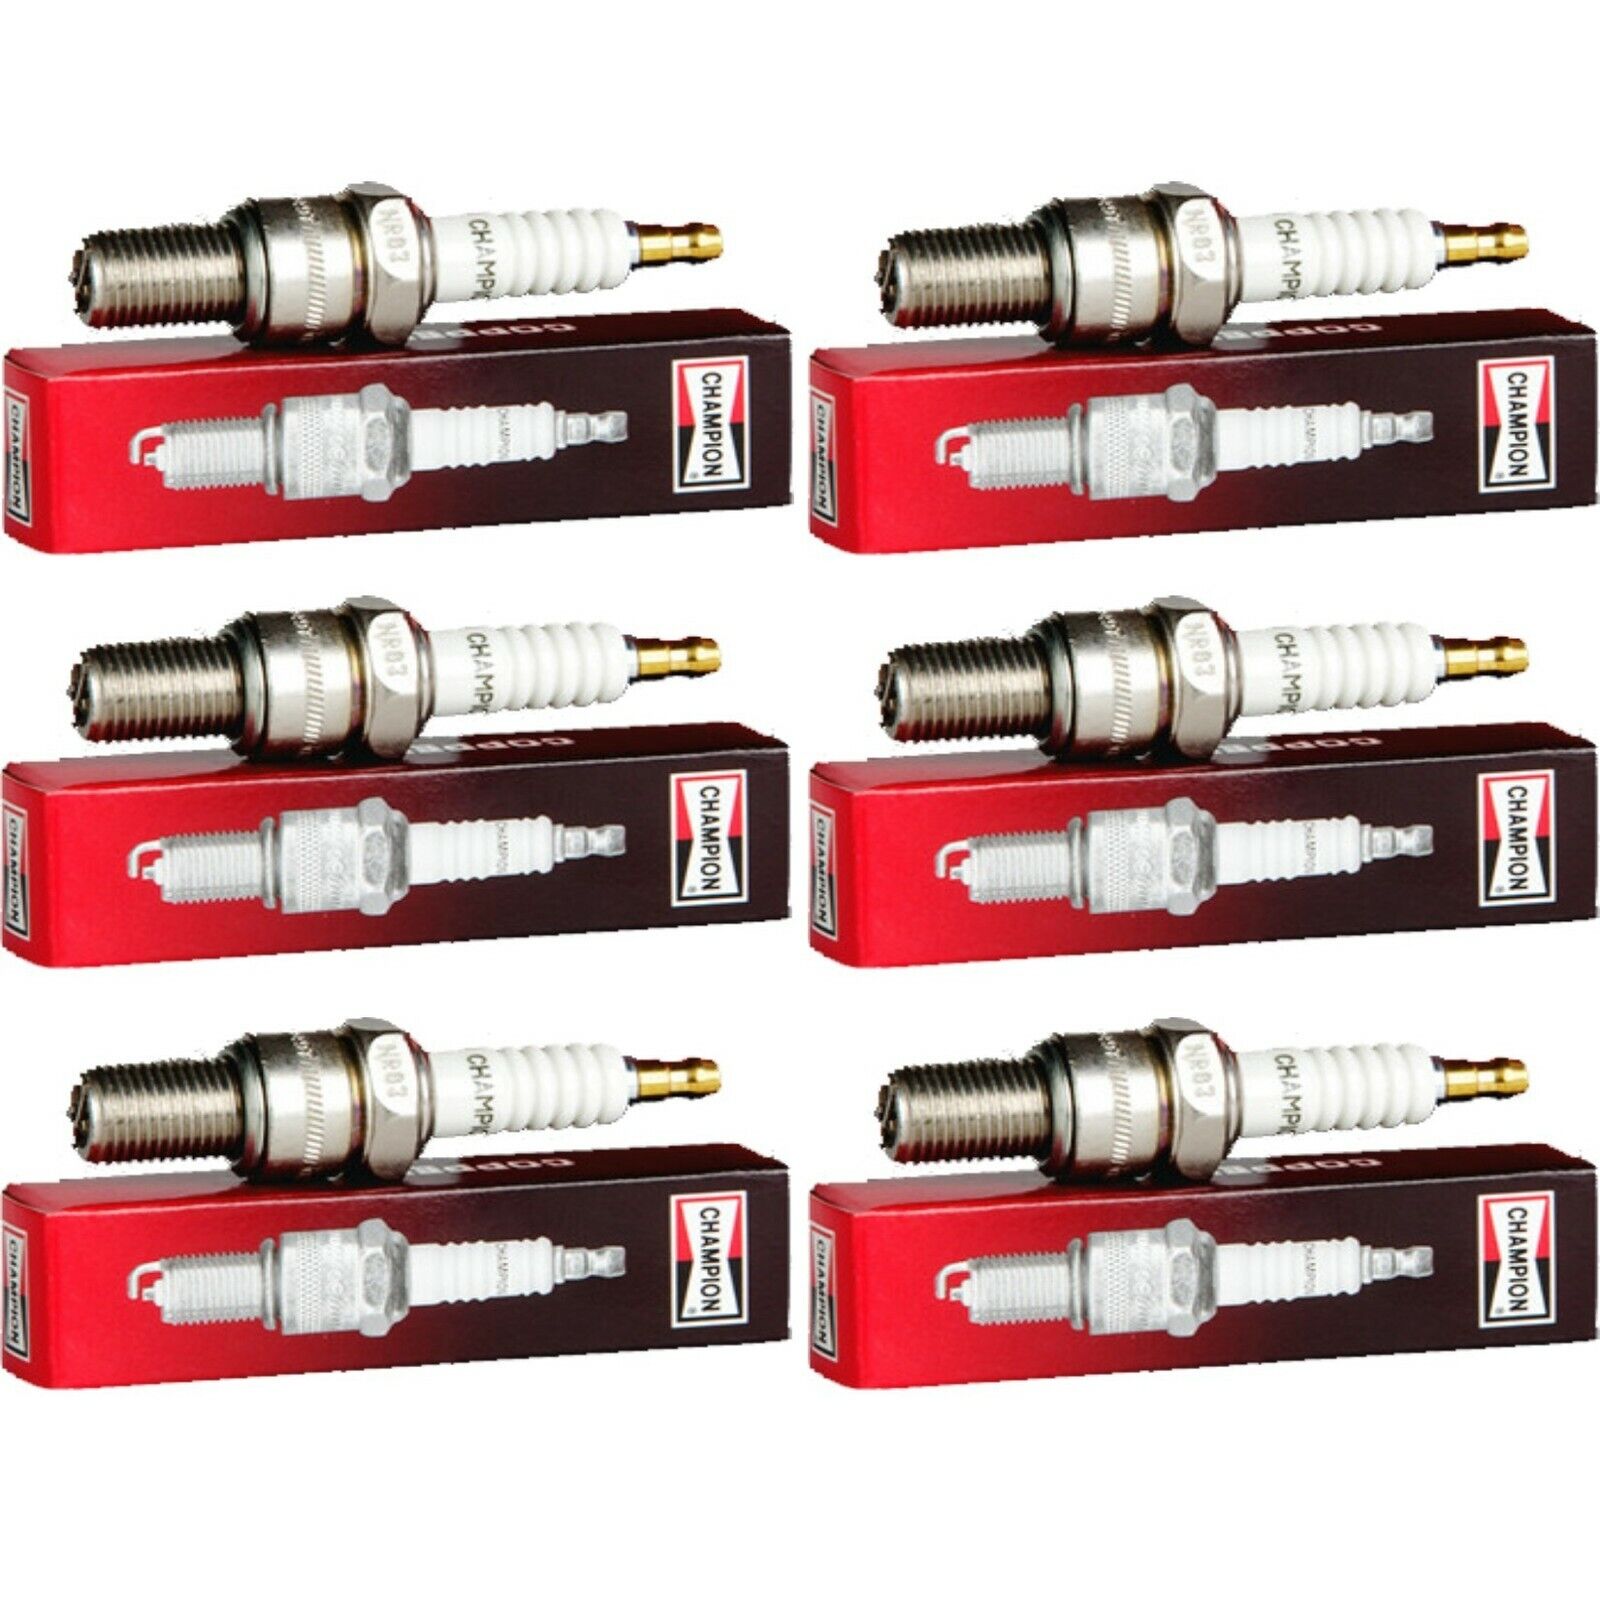 6 Champion Industrial Spark Plugs Set for 1935 HUPMOBILE SERIES 517-W